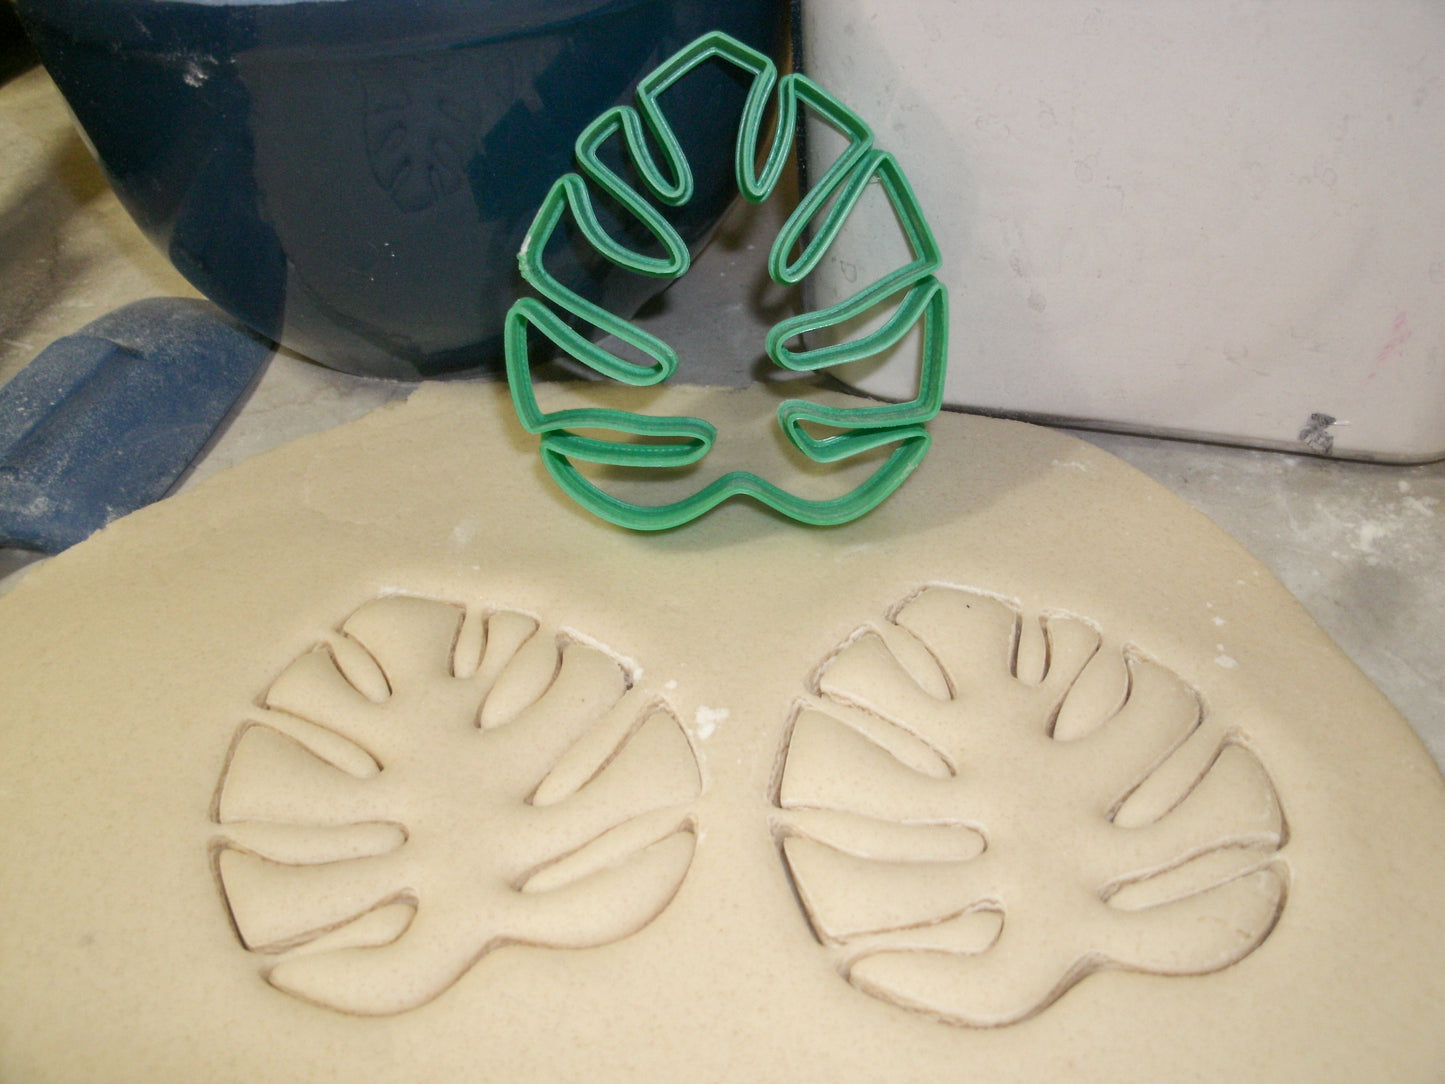 Monstera Leaf Tropical Flowering Plant Cookie Cutter Made In USA PR2158